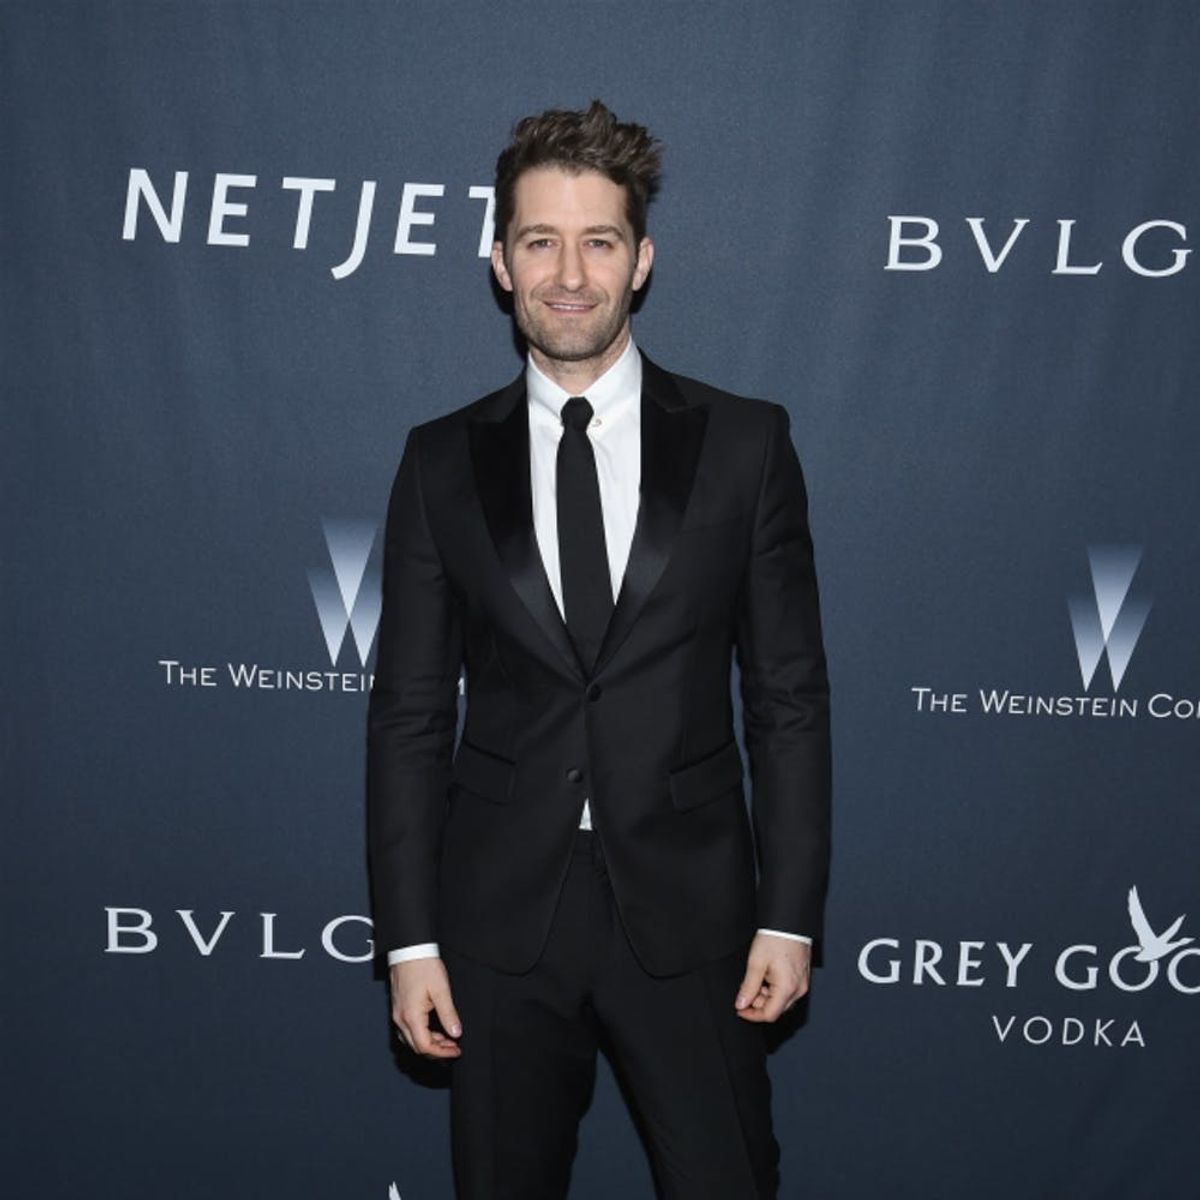 Glee’s Matthew Morrison Will Be Appearing on Grey’s Anatomy